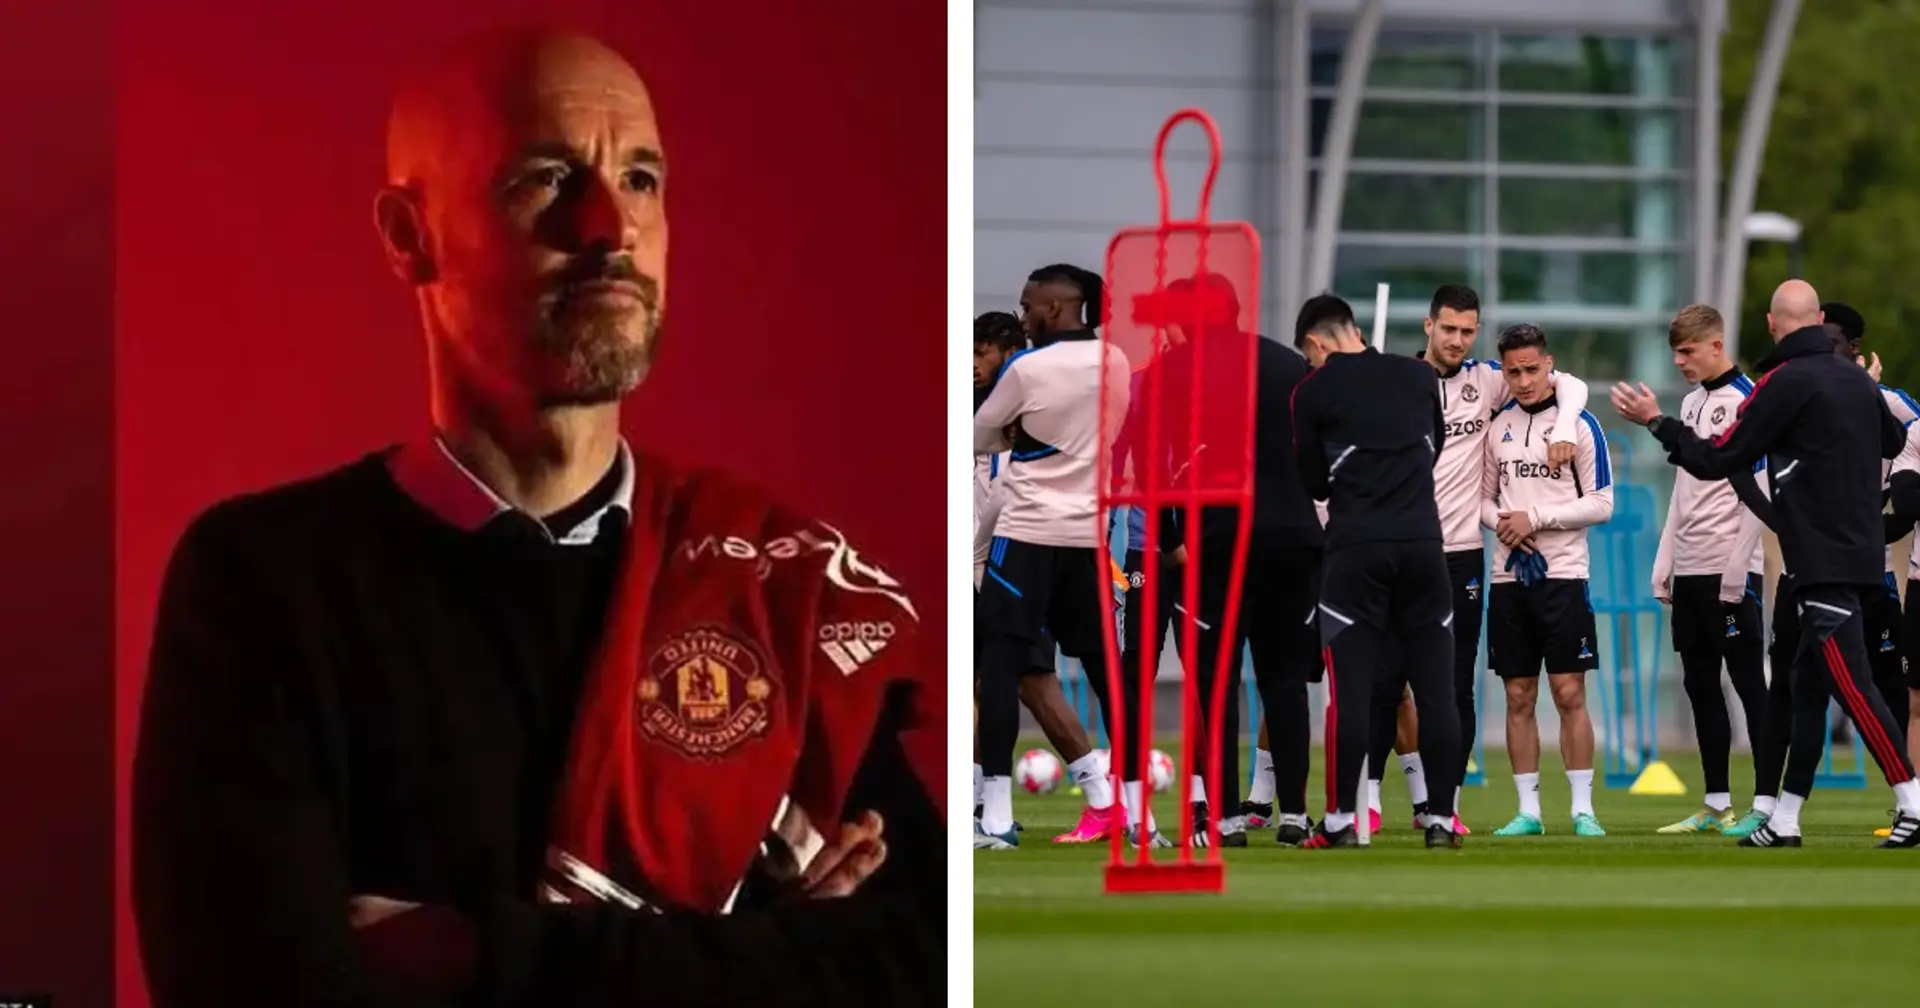 'Don't know why Ten Hag didn't want him': Man United fans name one person who should've stayed in summer 2022